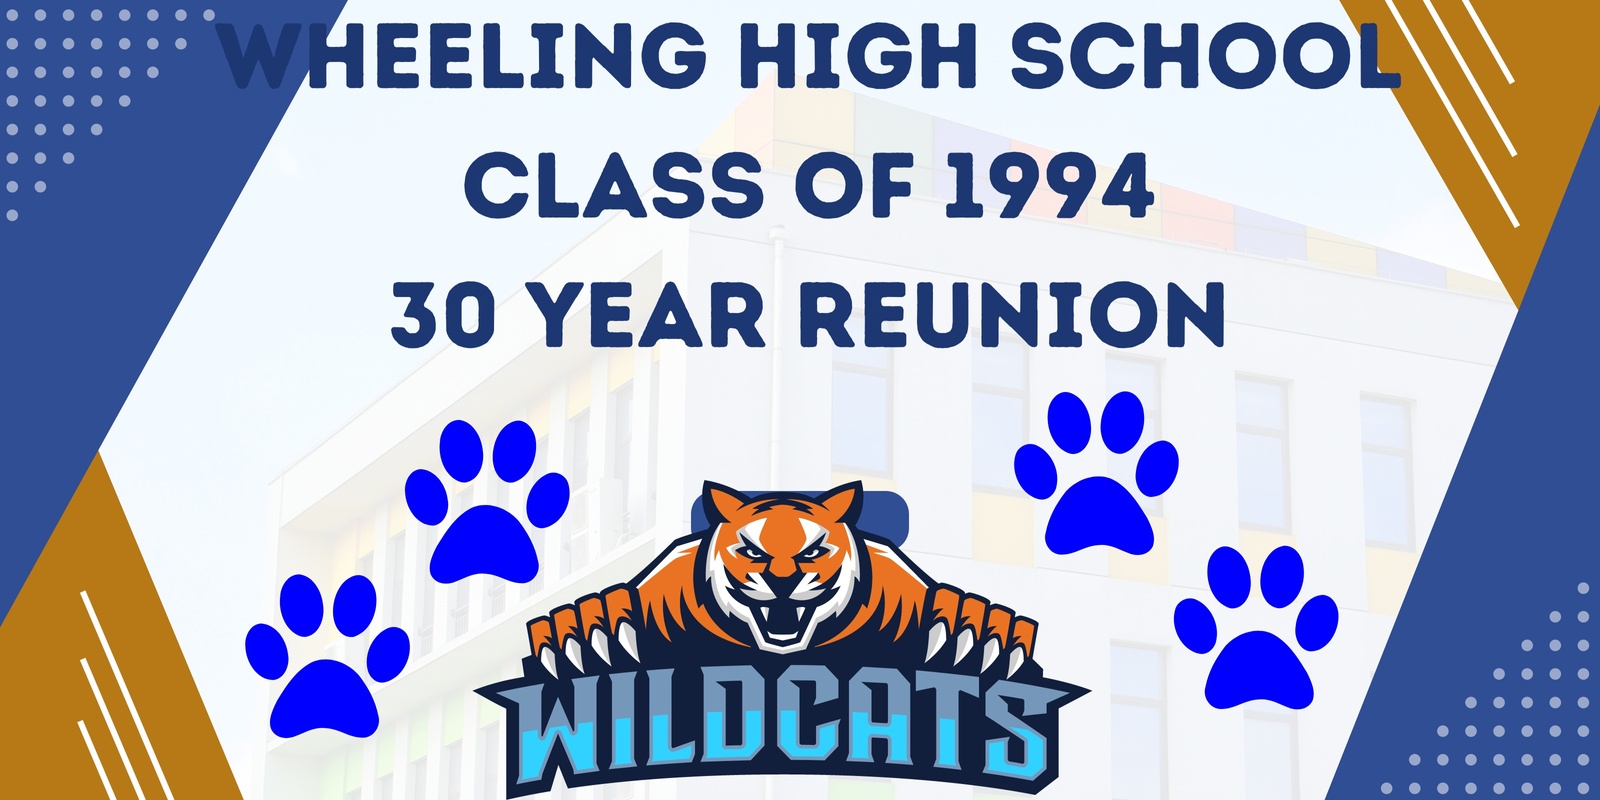 Banner image for Wheeling High School Wheeling, IL Class of 1994/30 year reunion